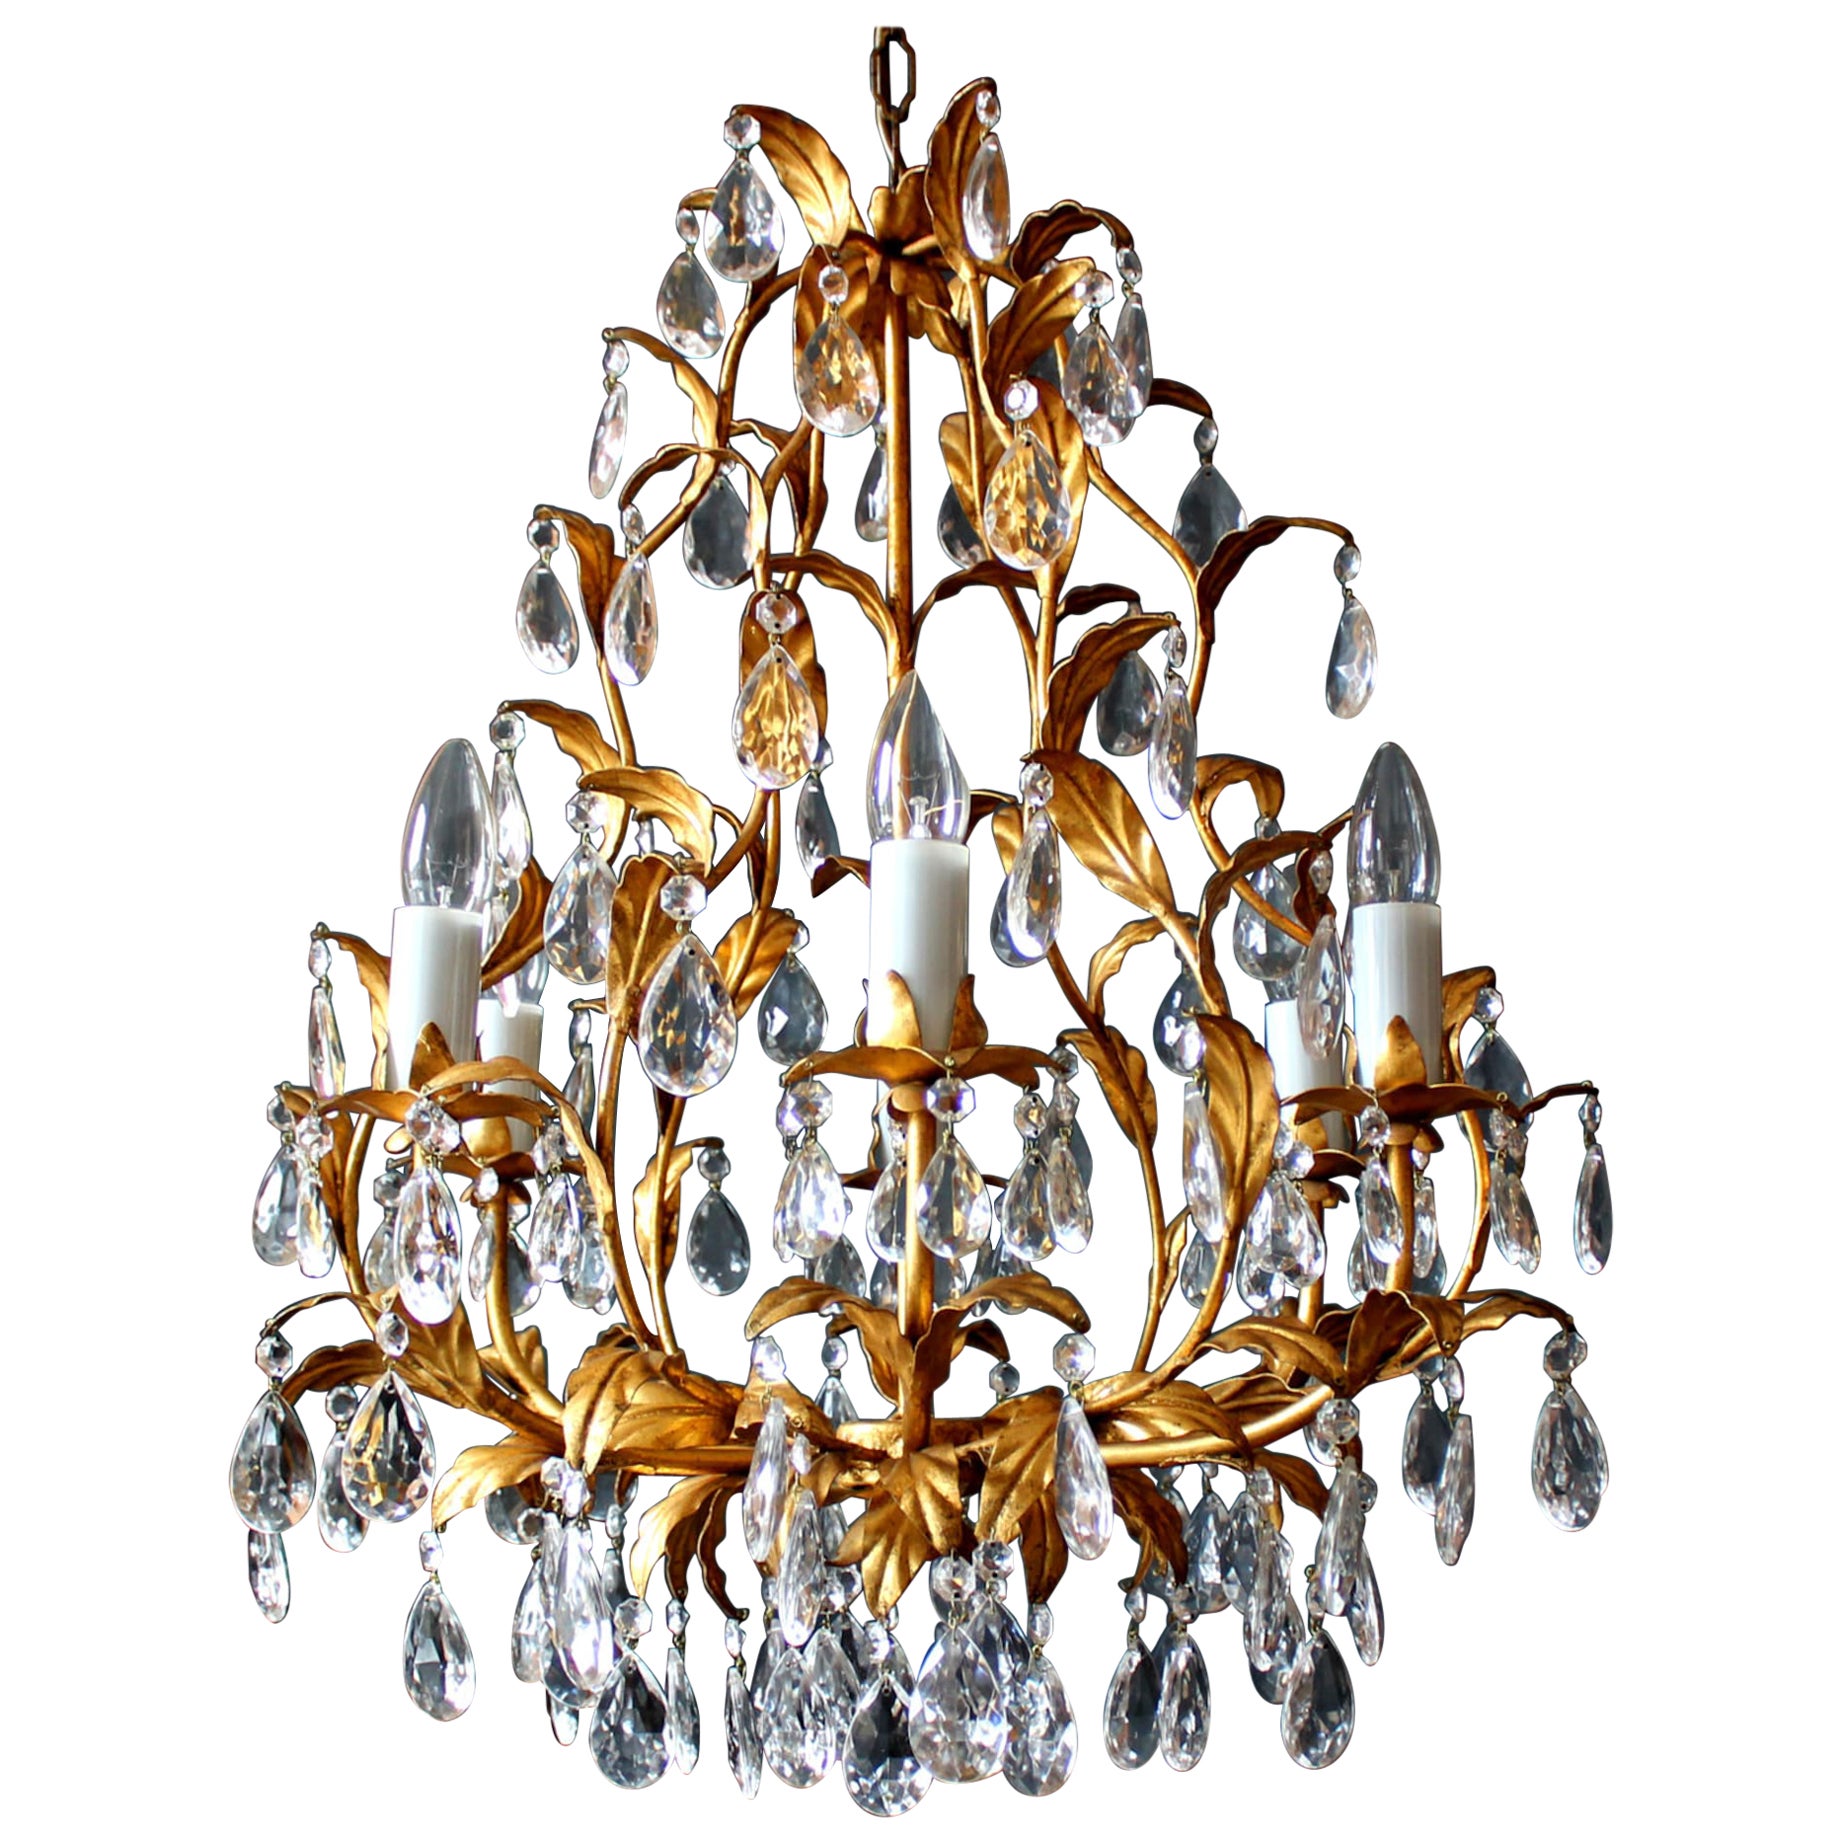 Petite Gold-Plated Banci Firence Chandelier, Italy 1950s For Sale